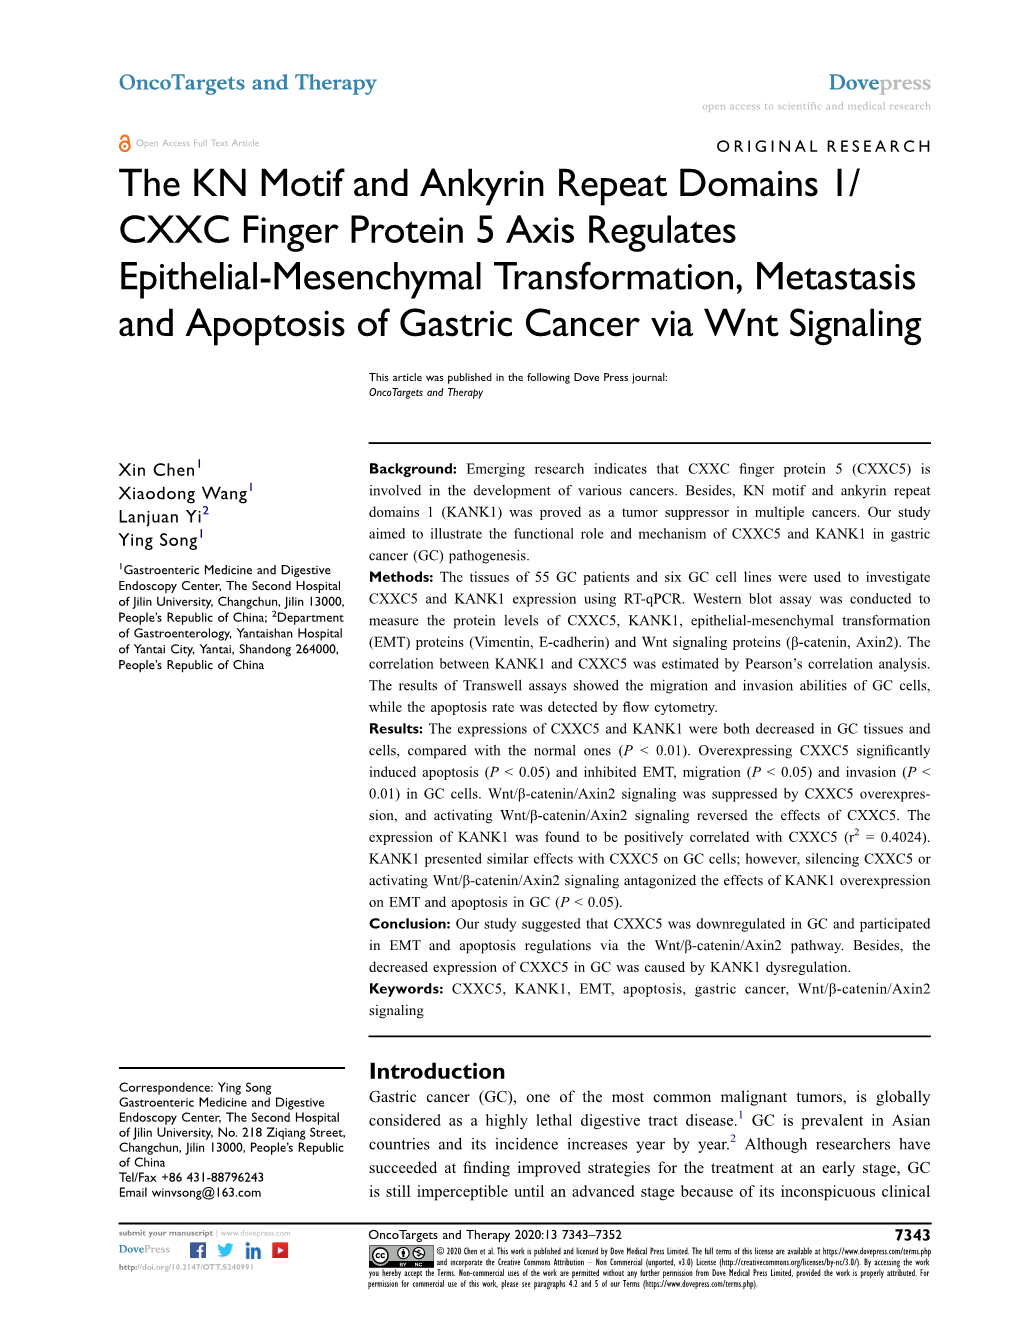 The KN Motif and Ankyrin Repeat Domains 1/ CXXC Finger Protein 5